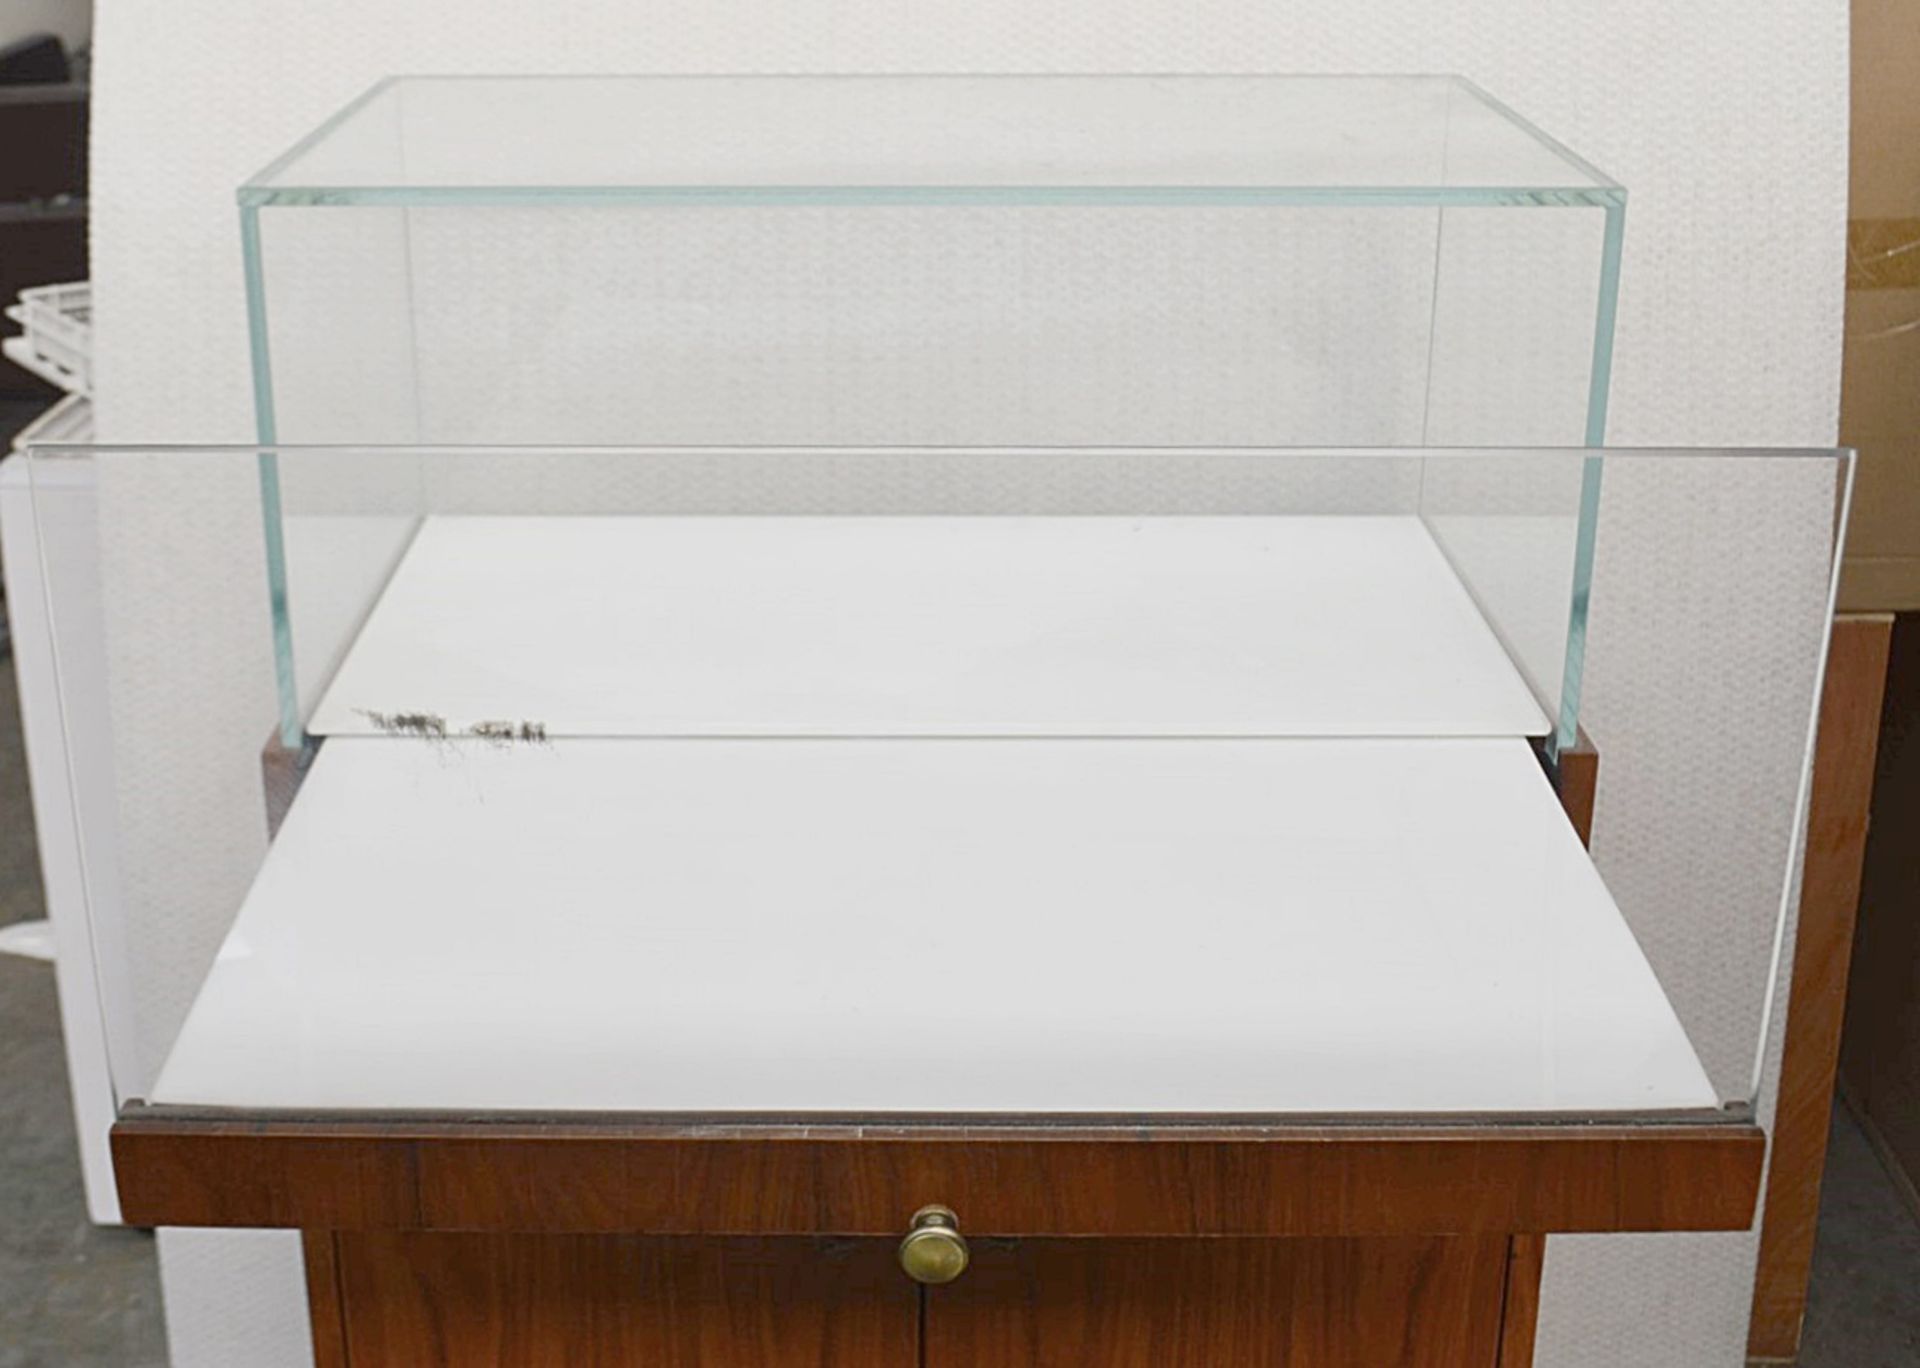 1 x 2-Door Jewellery Display Unit With Slide-apart Glass Top - Dimensions: H120 x W70 x D40cm - Ref: - Image 4 of 6